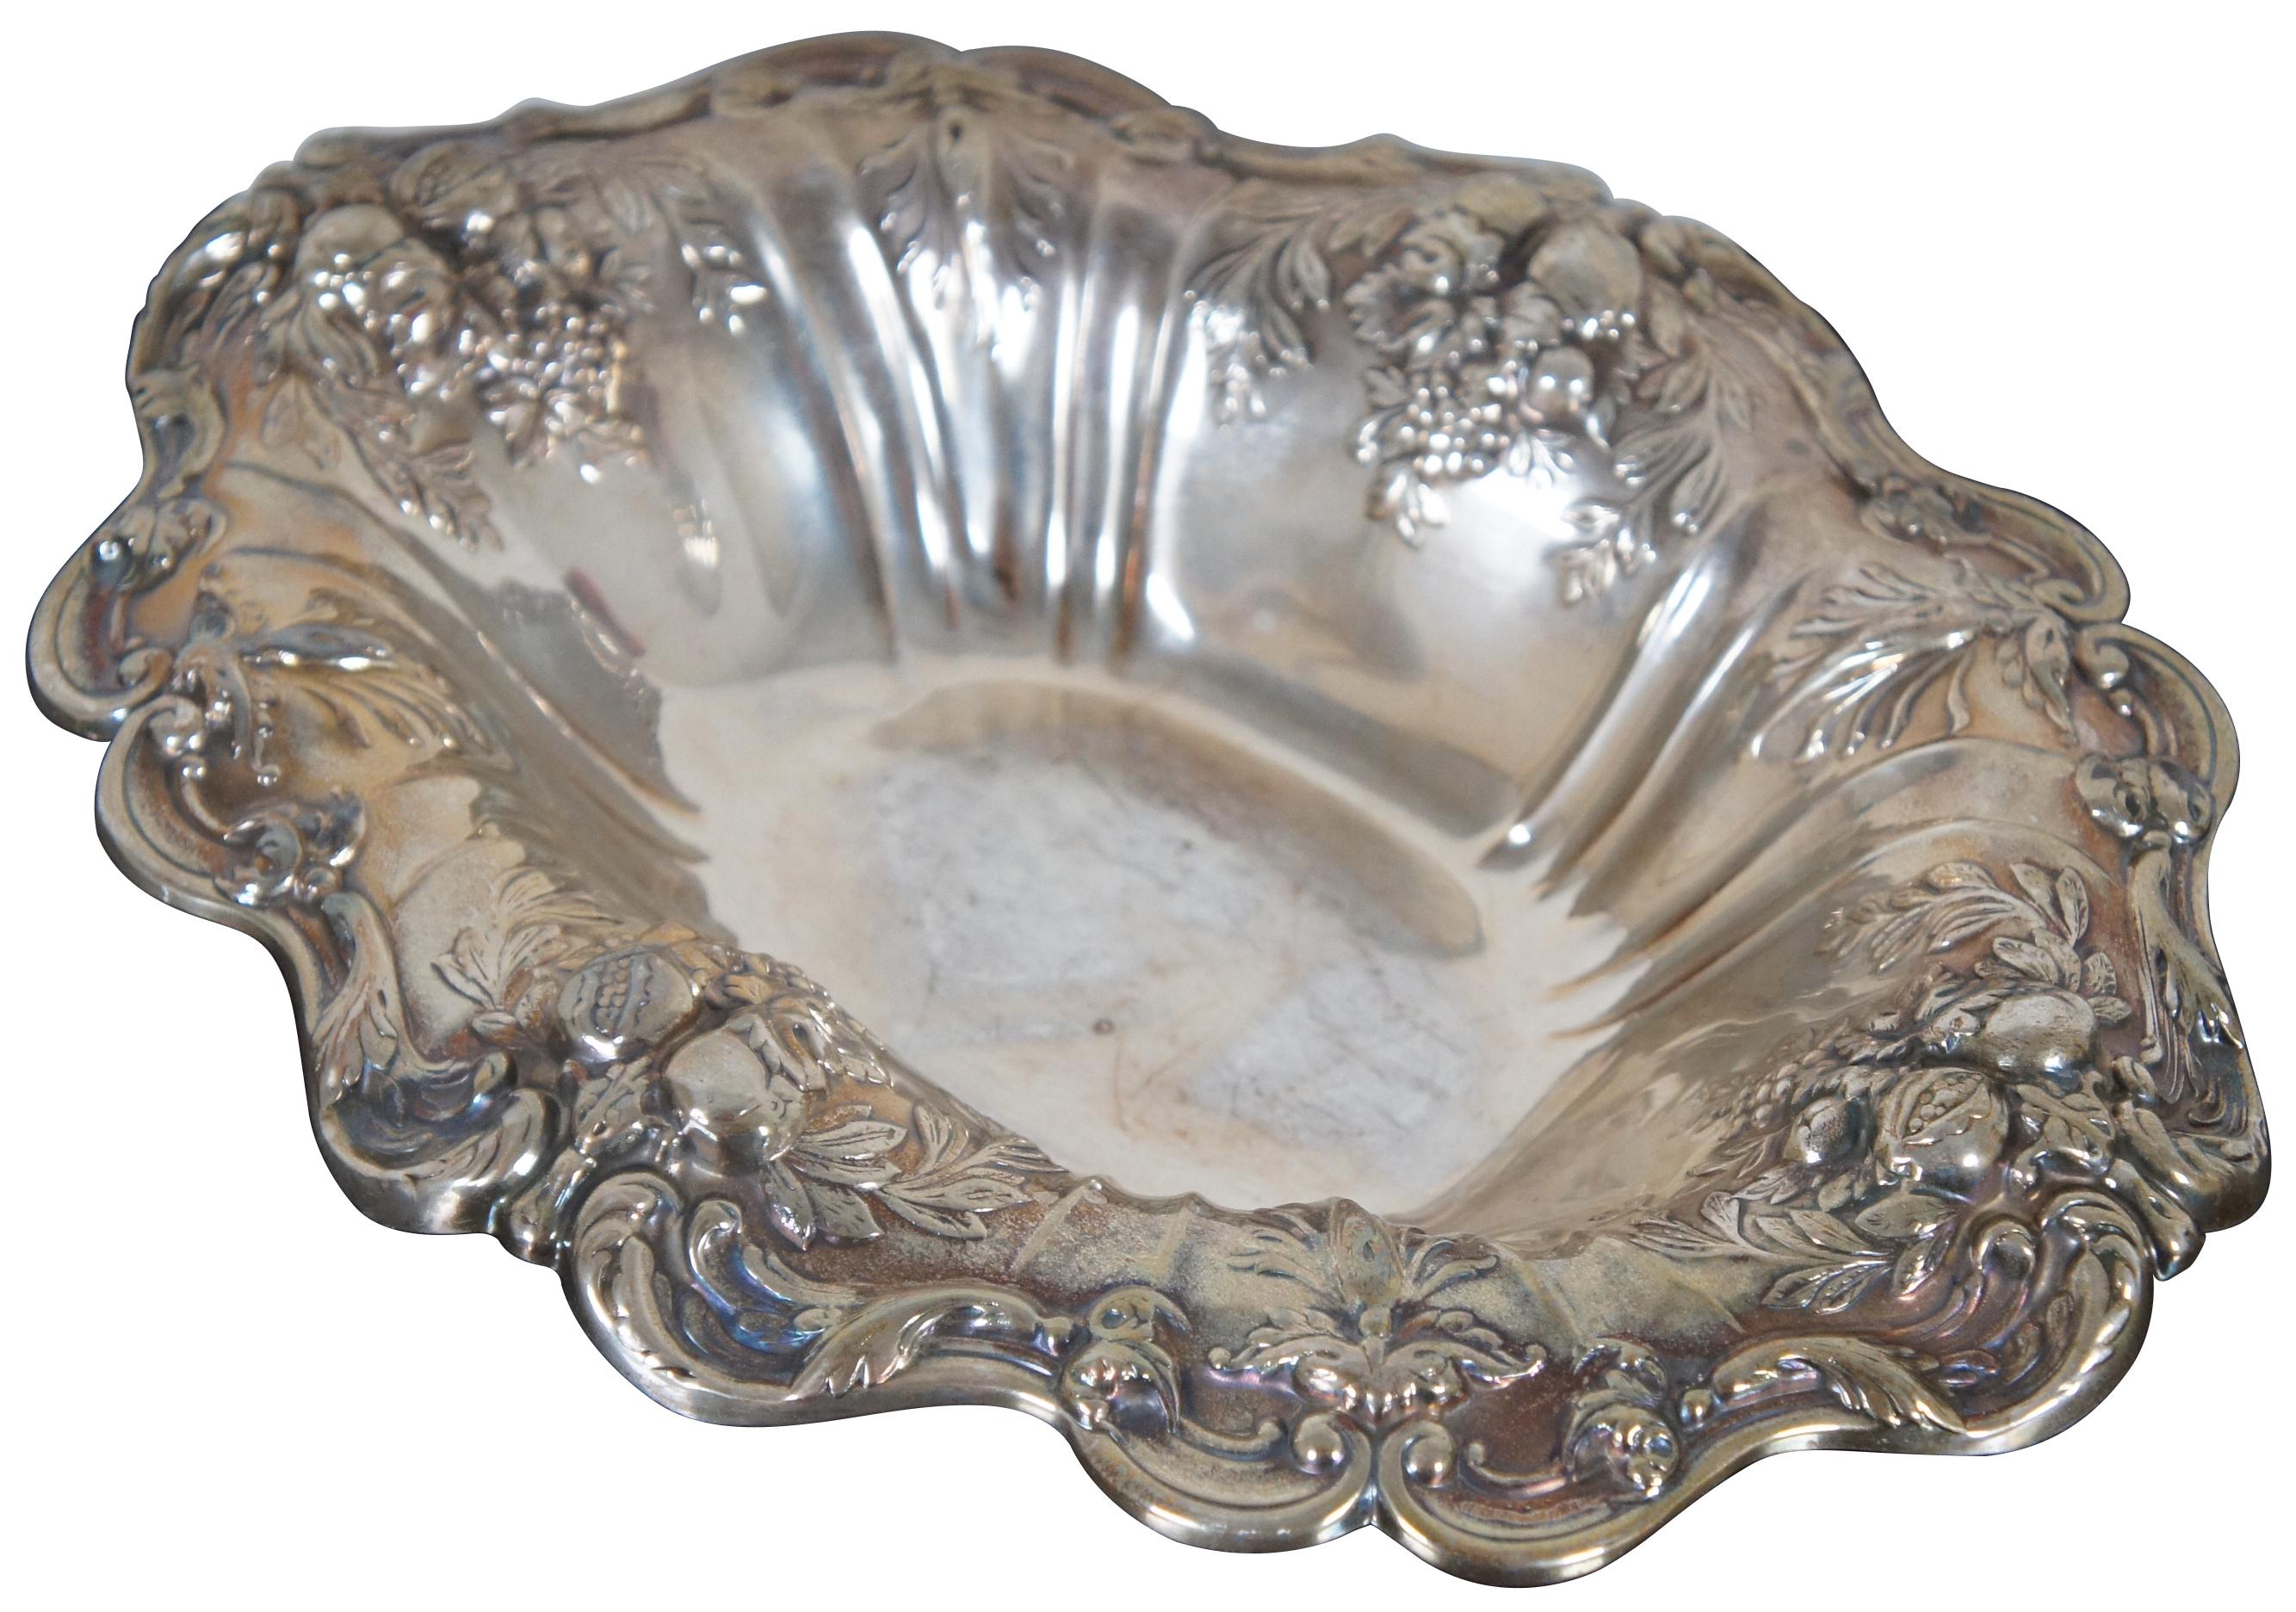 Vintage Reed and Barton X566F Francis I sterling silver 925 oval footed serving centerpiece dish or bowl with scalloped edge decorated with fruit and flowers. Measures: 13